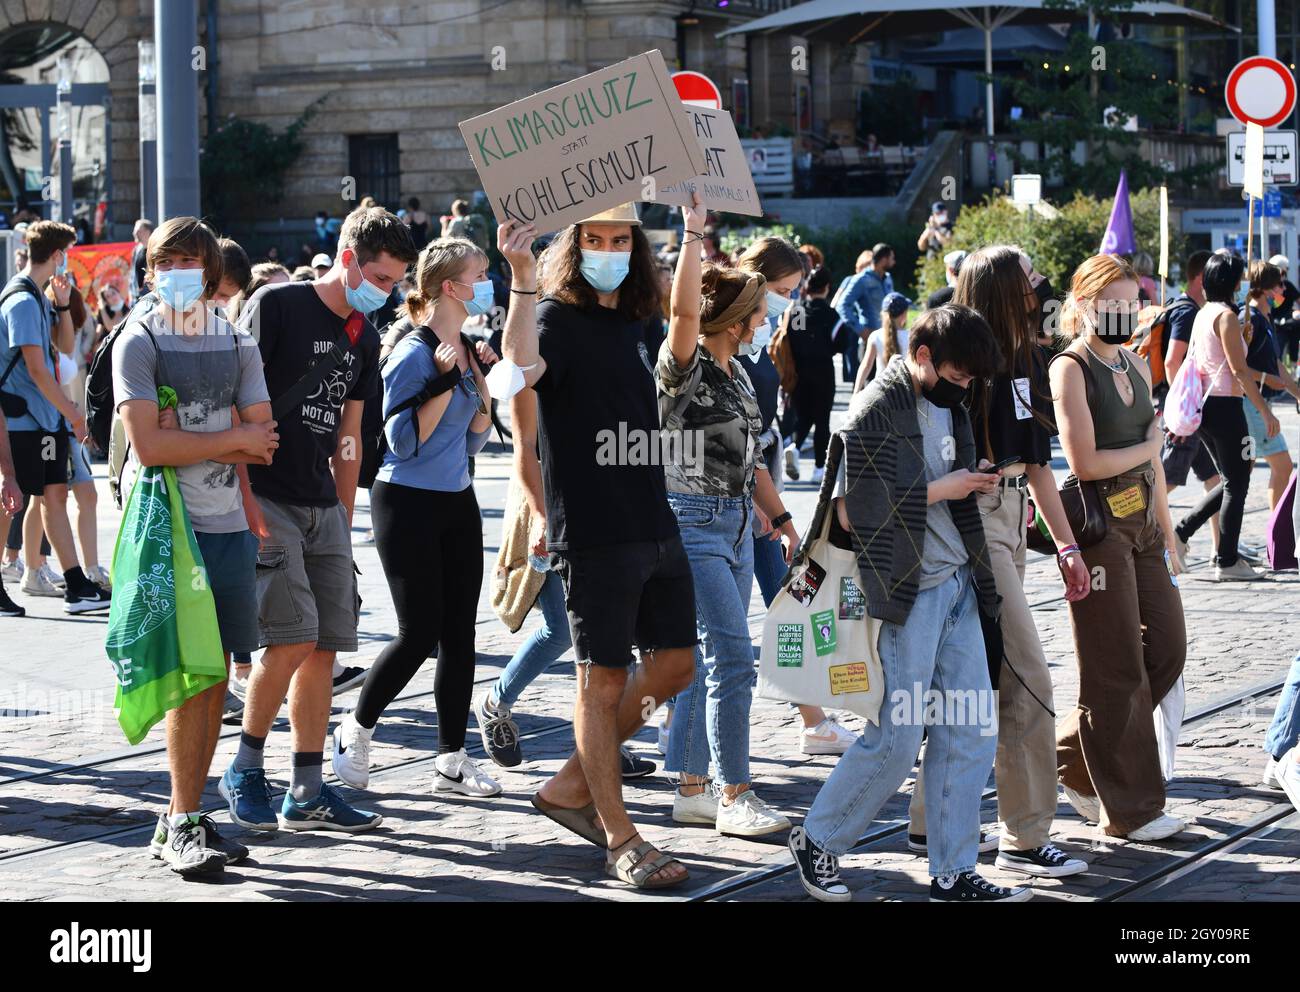 Freiburg Germany Fridays for Future protest German climate activists demonstrate against global warming Stock Photo